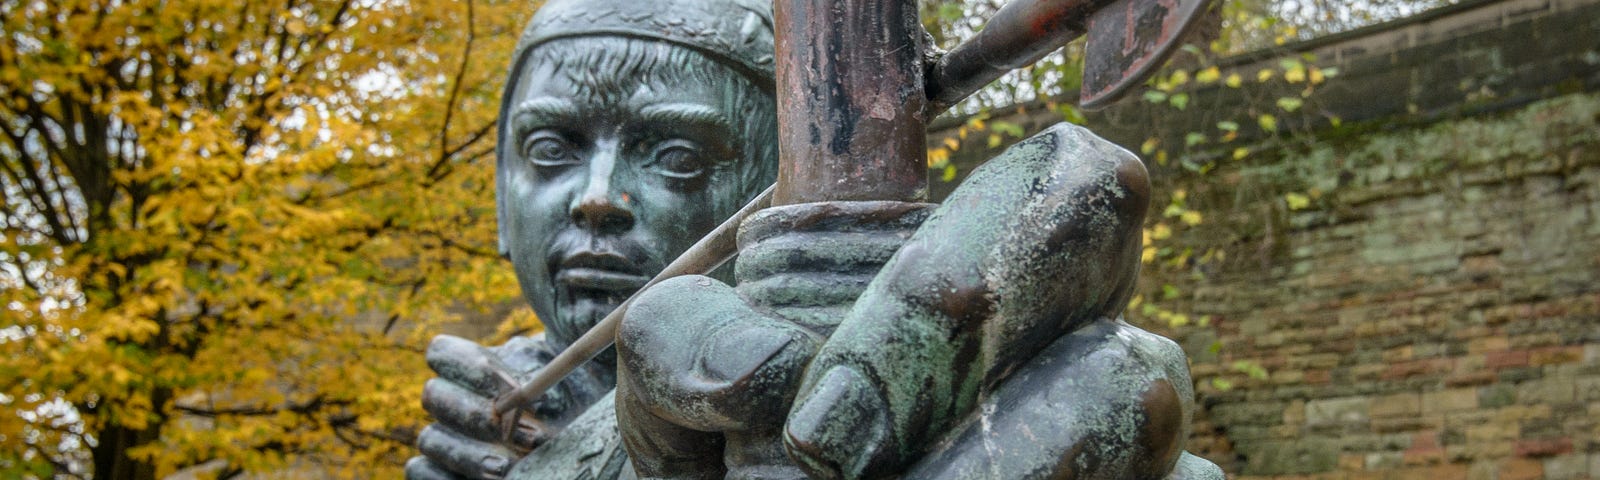 Weather-aged statue of an archer, his bow-hand in the extreme foreground as he aims his arrow with the other, ready to let it fly. Stone wall and trees with fall colors in background.